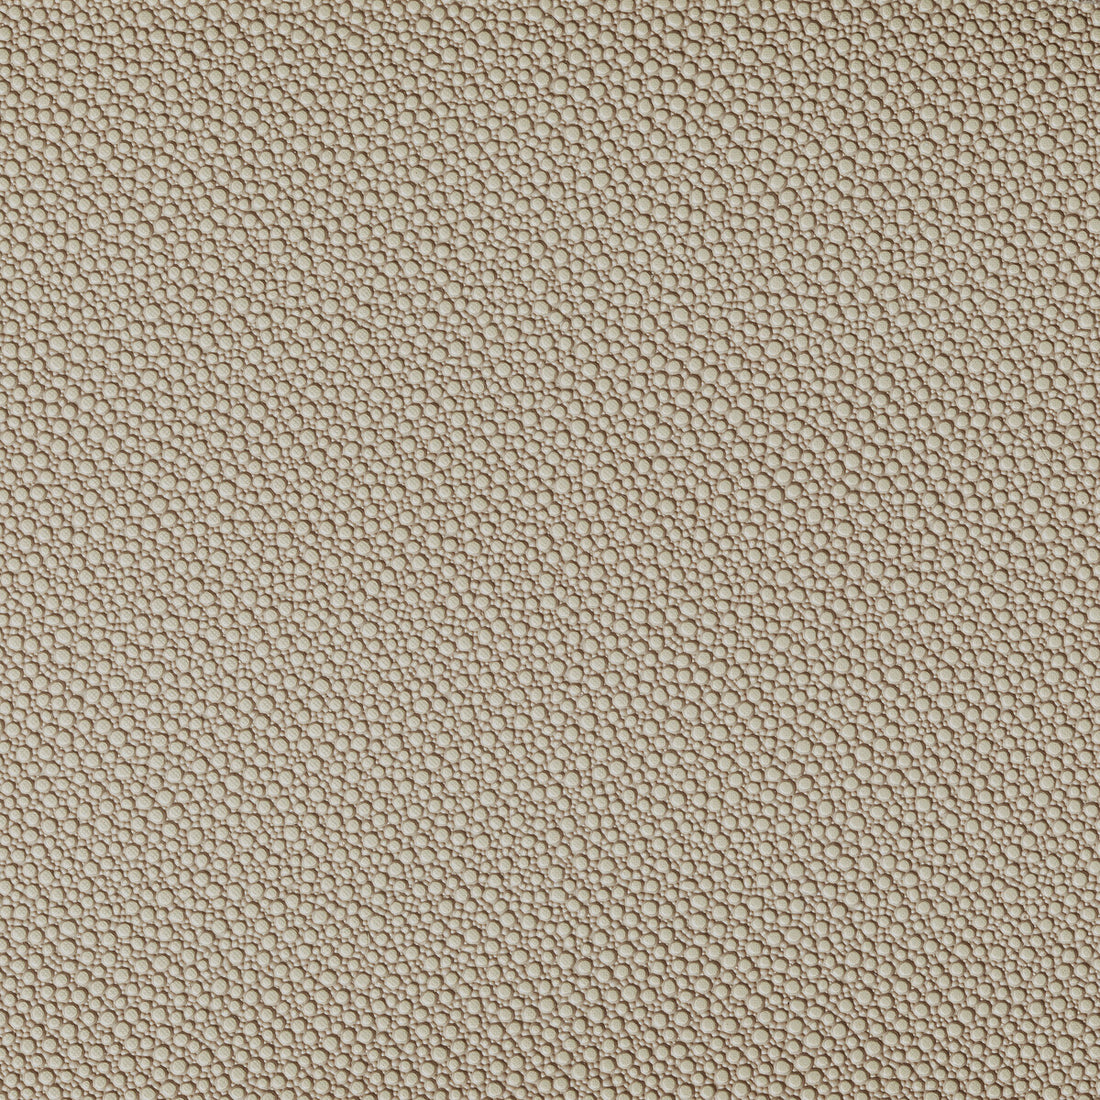 Fetch fabric in stone color - pattern FETCH.1616.0 - by Kravet Contract in the Foundations / Value collection